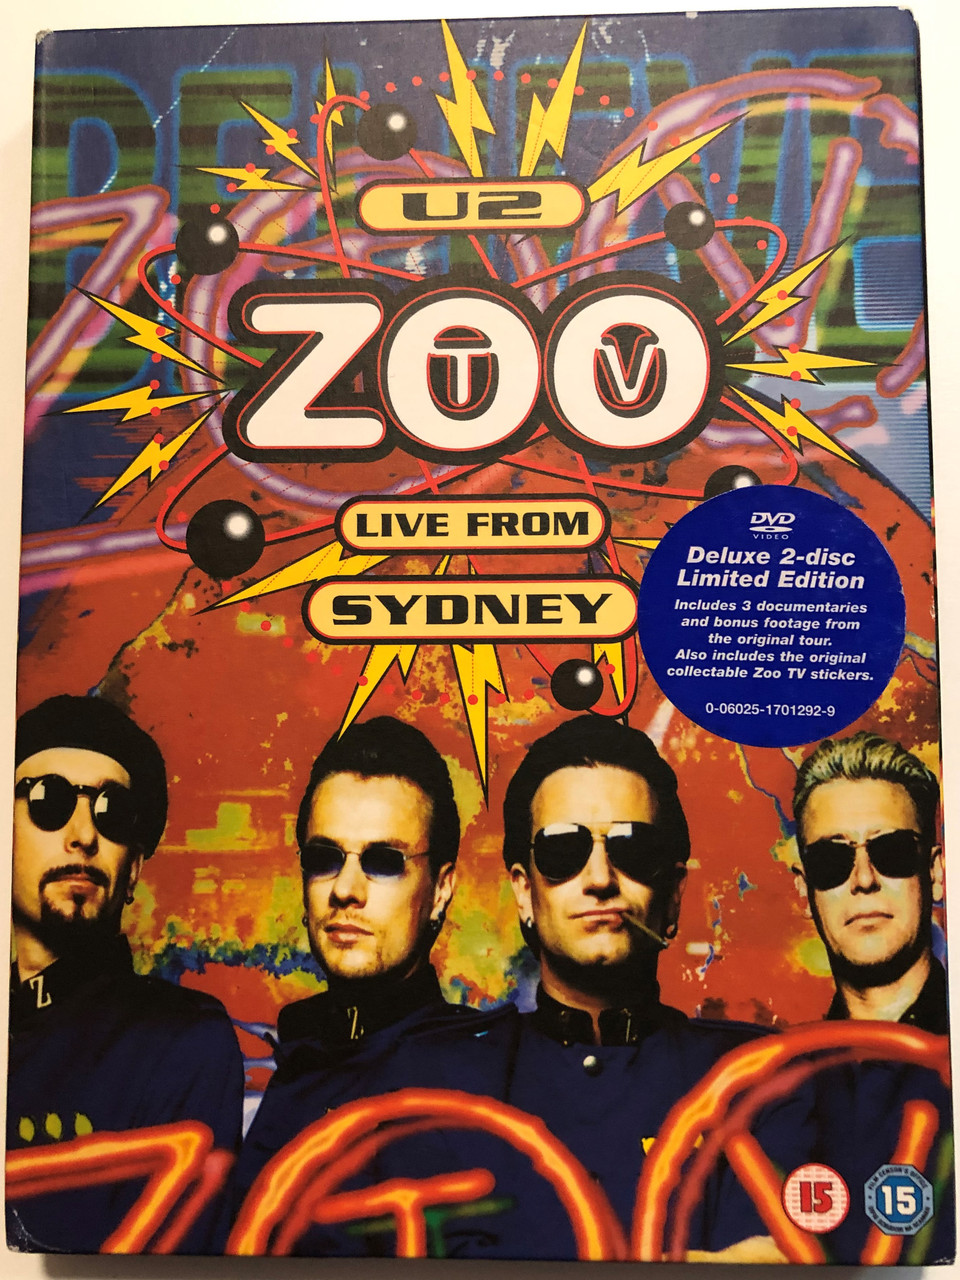 U2 - Zoo TV DVD 2006 Live from Sydney / Deluxe 2-disc Limited Edition /  Includes 3 documentaries